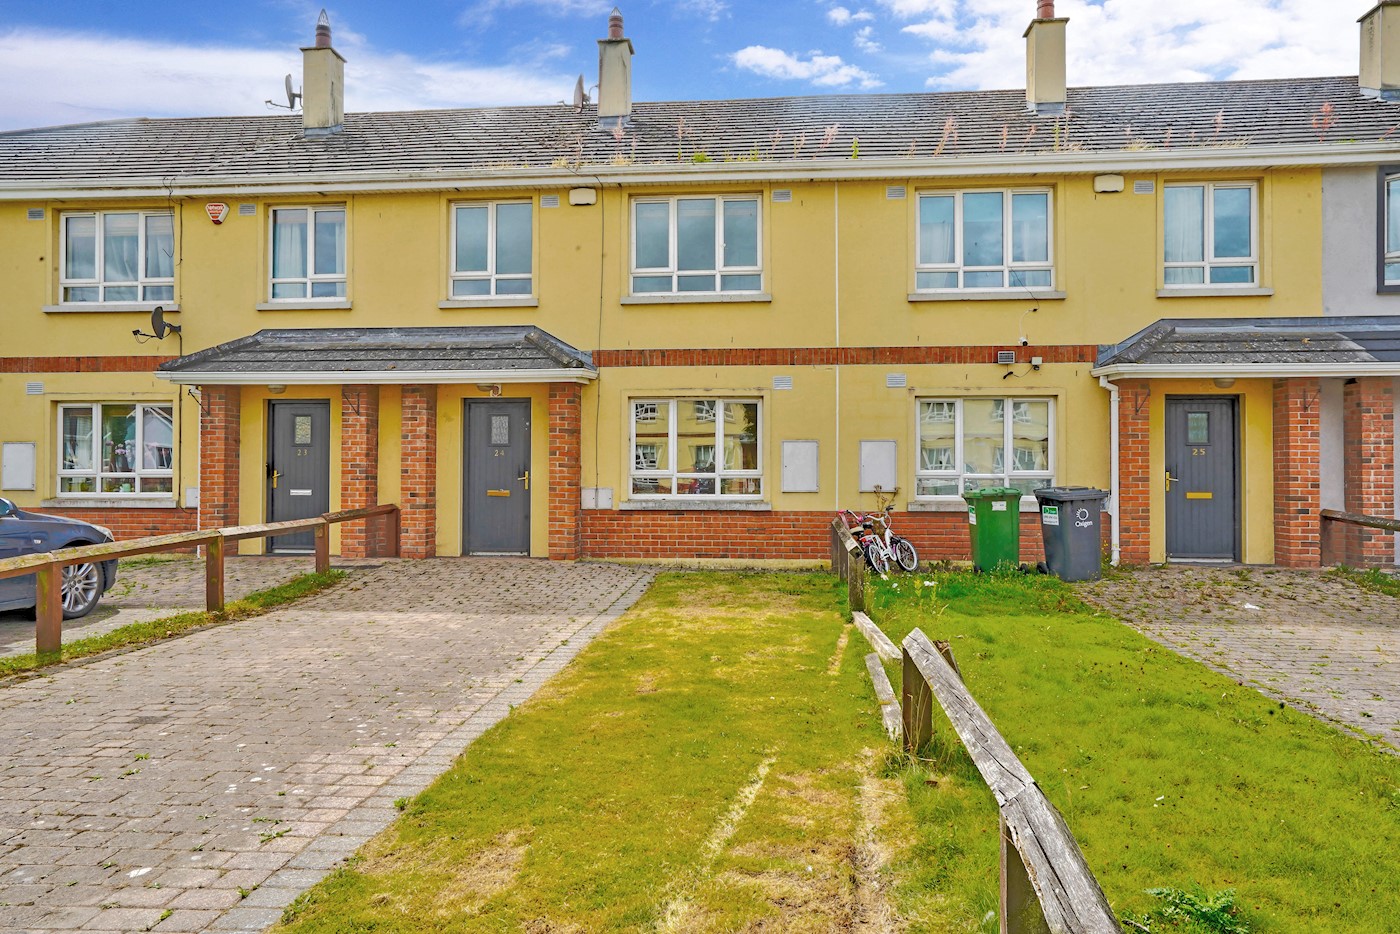 24 Carrickhall Lane, Edenderry, Co. Offaly, R45 XW13 1/19